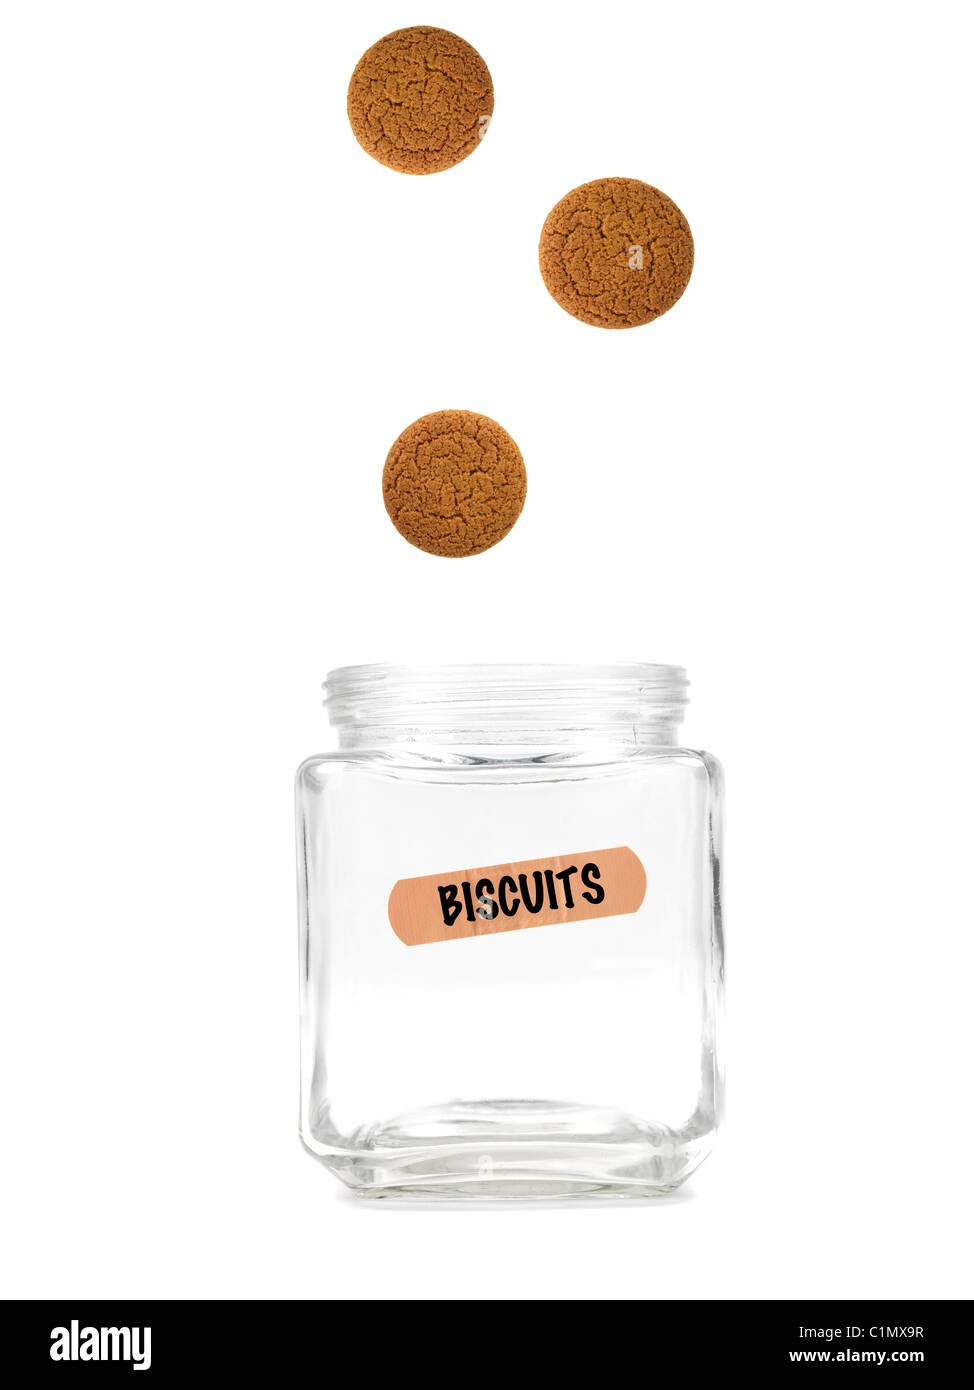 An empty jar with a biscuit label isolated against a white background Stock Photo